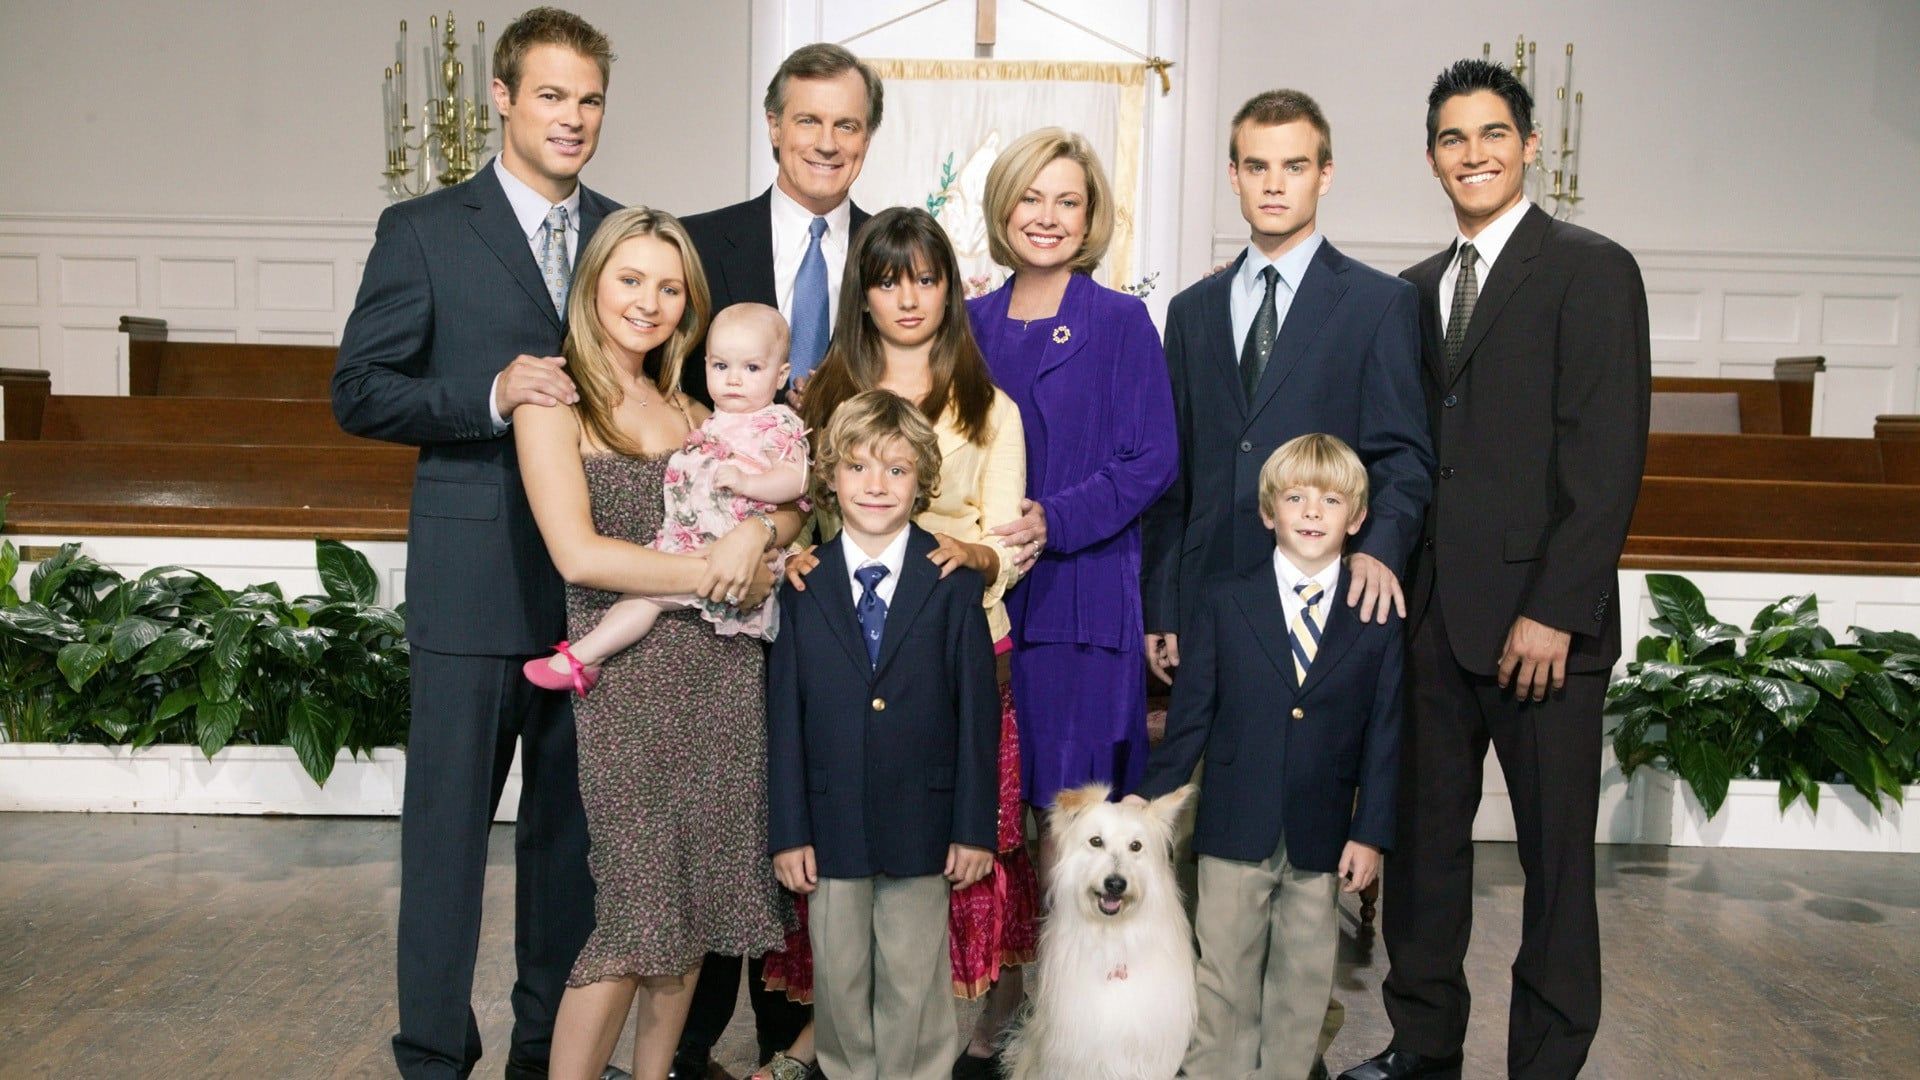 7th Heaven Episodes on Prime Video, Hulu, CBS All Access